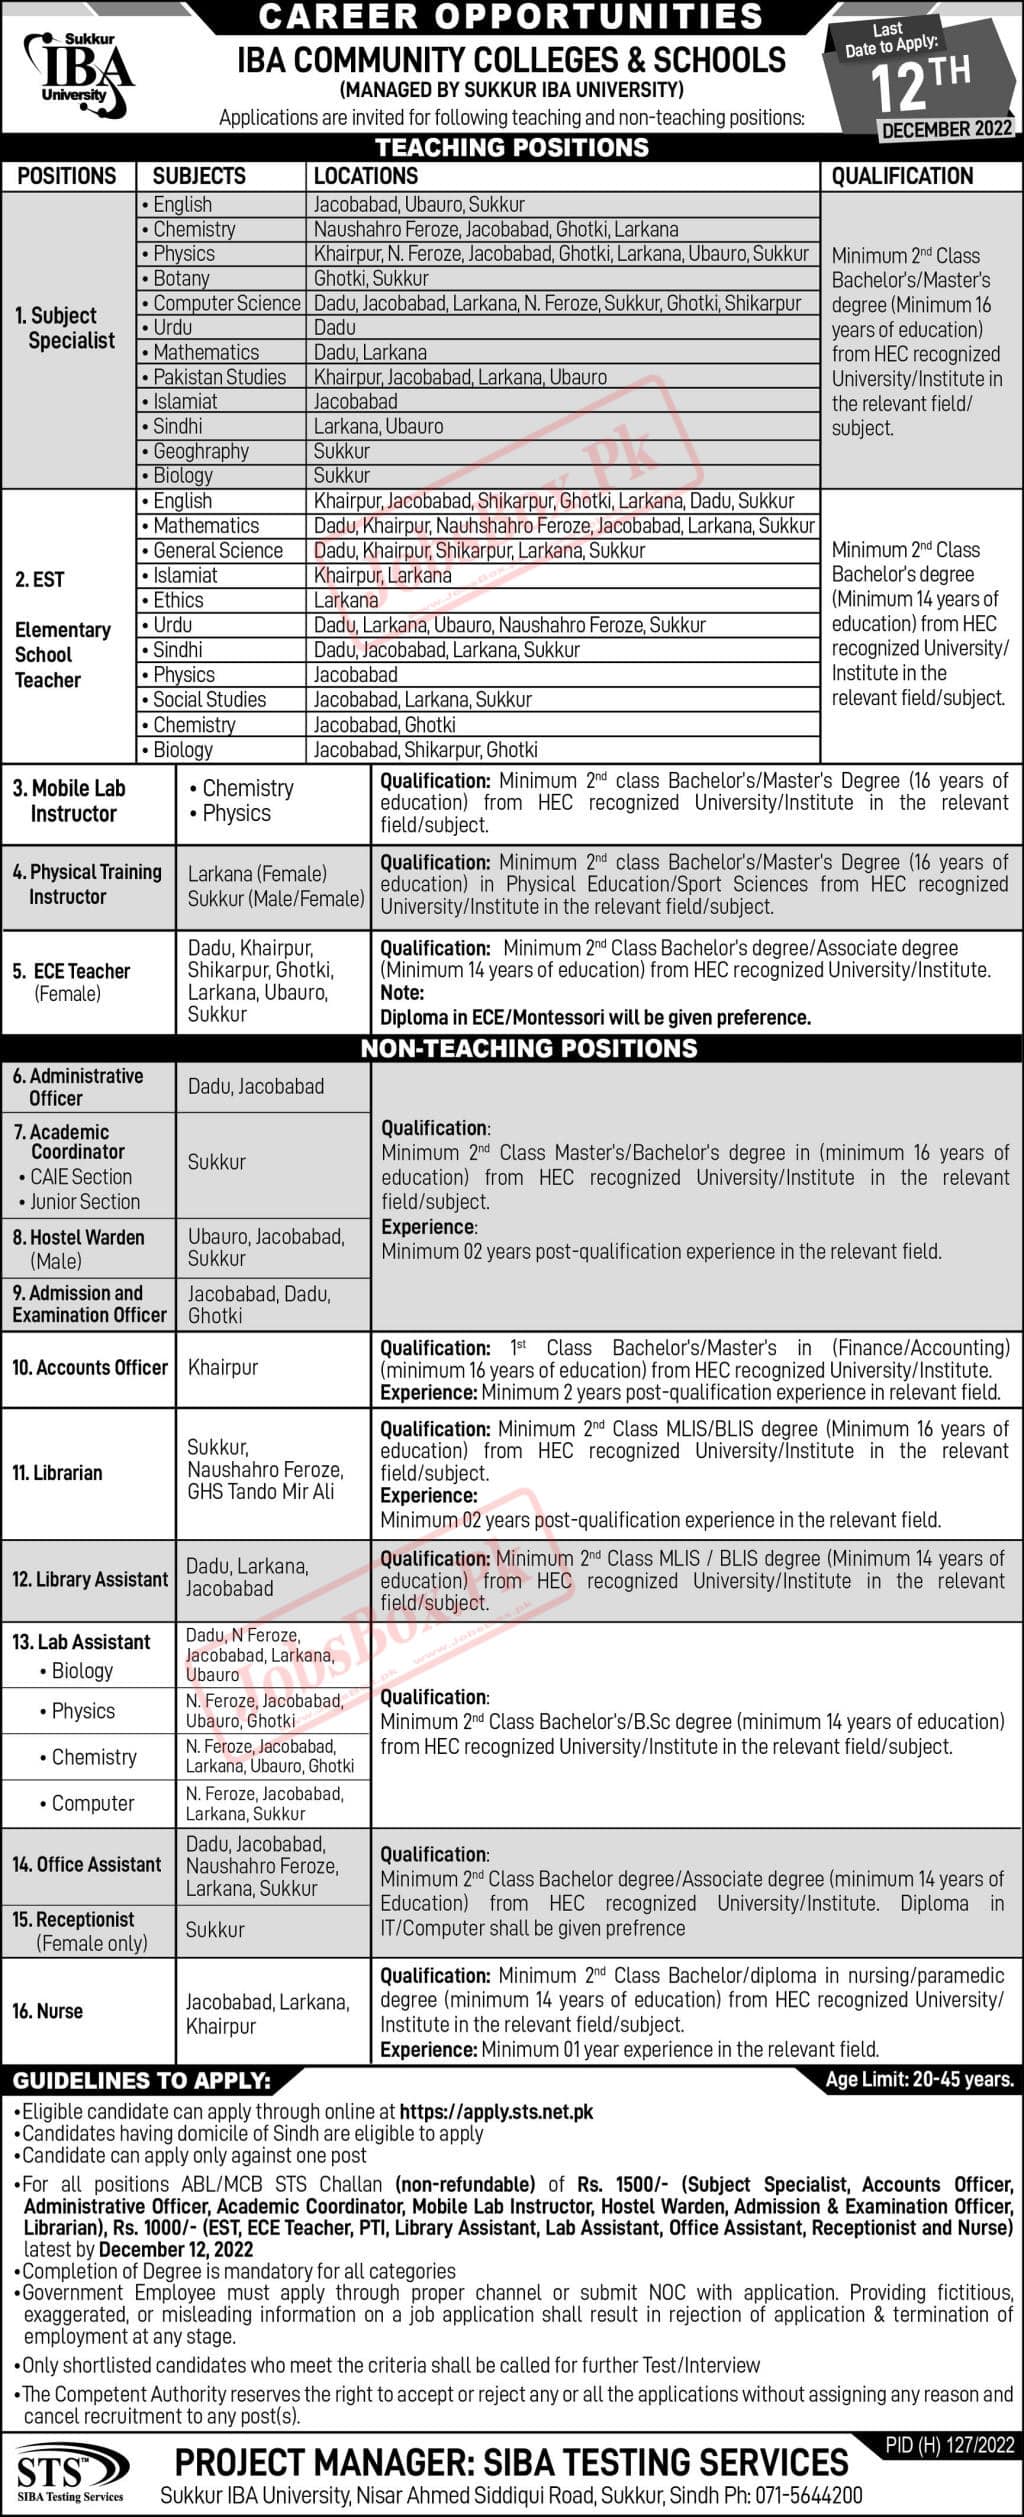 IBA Community Colleges & Schools Jobs 2022 - Online Apply at STS